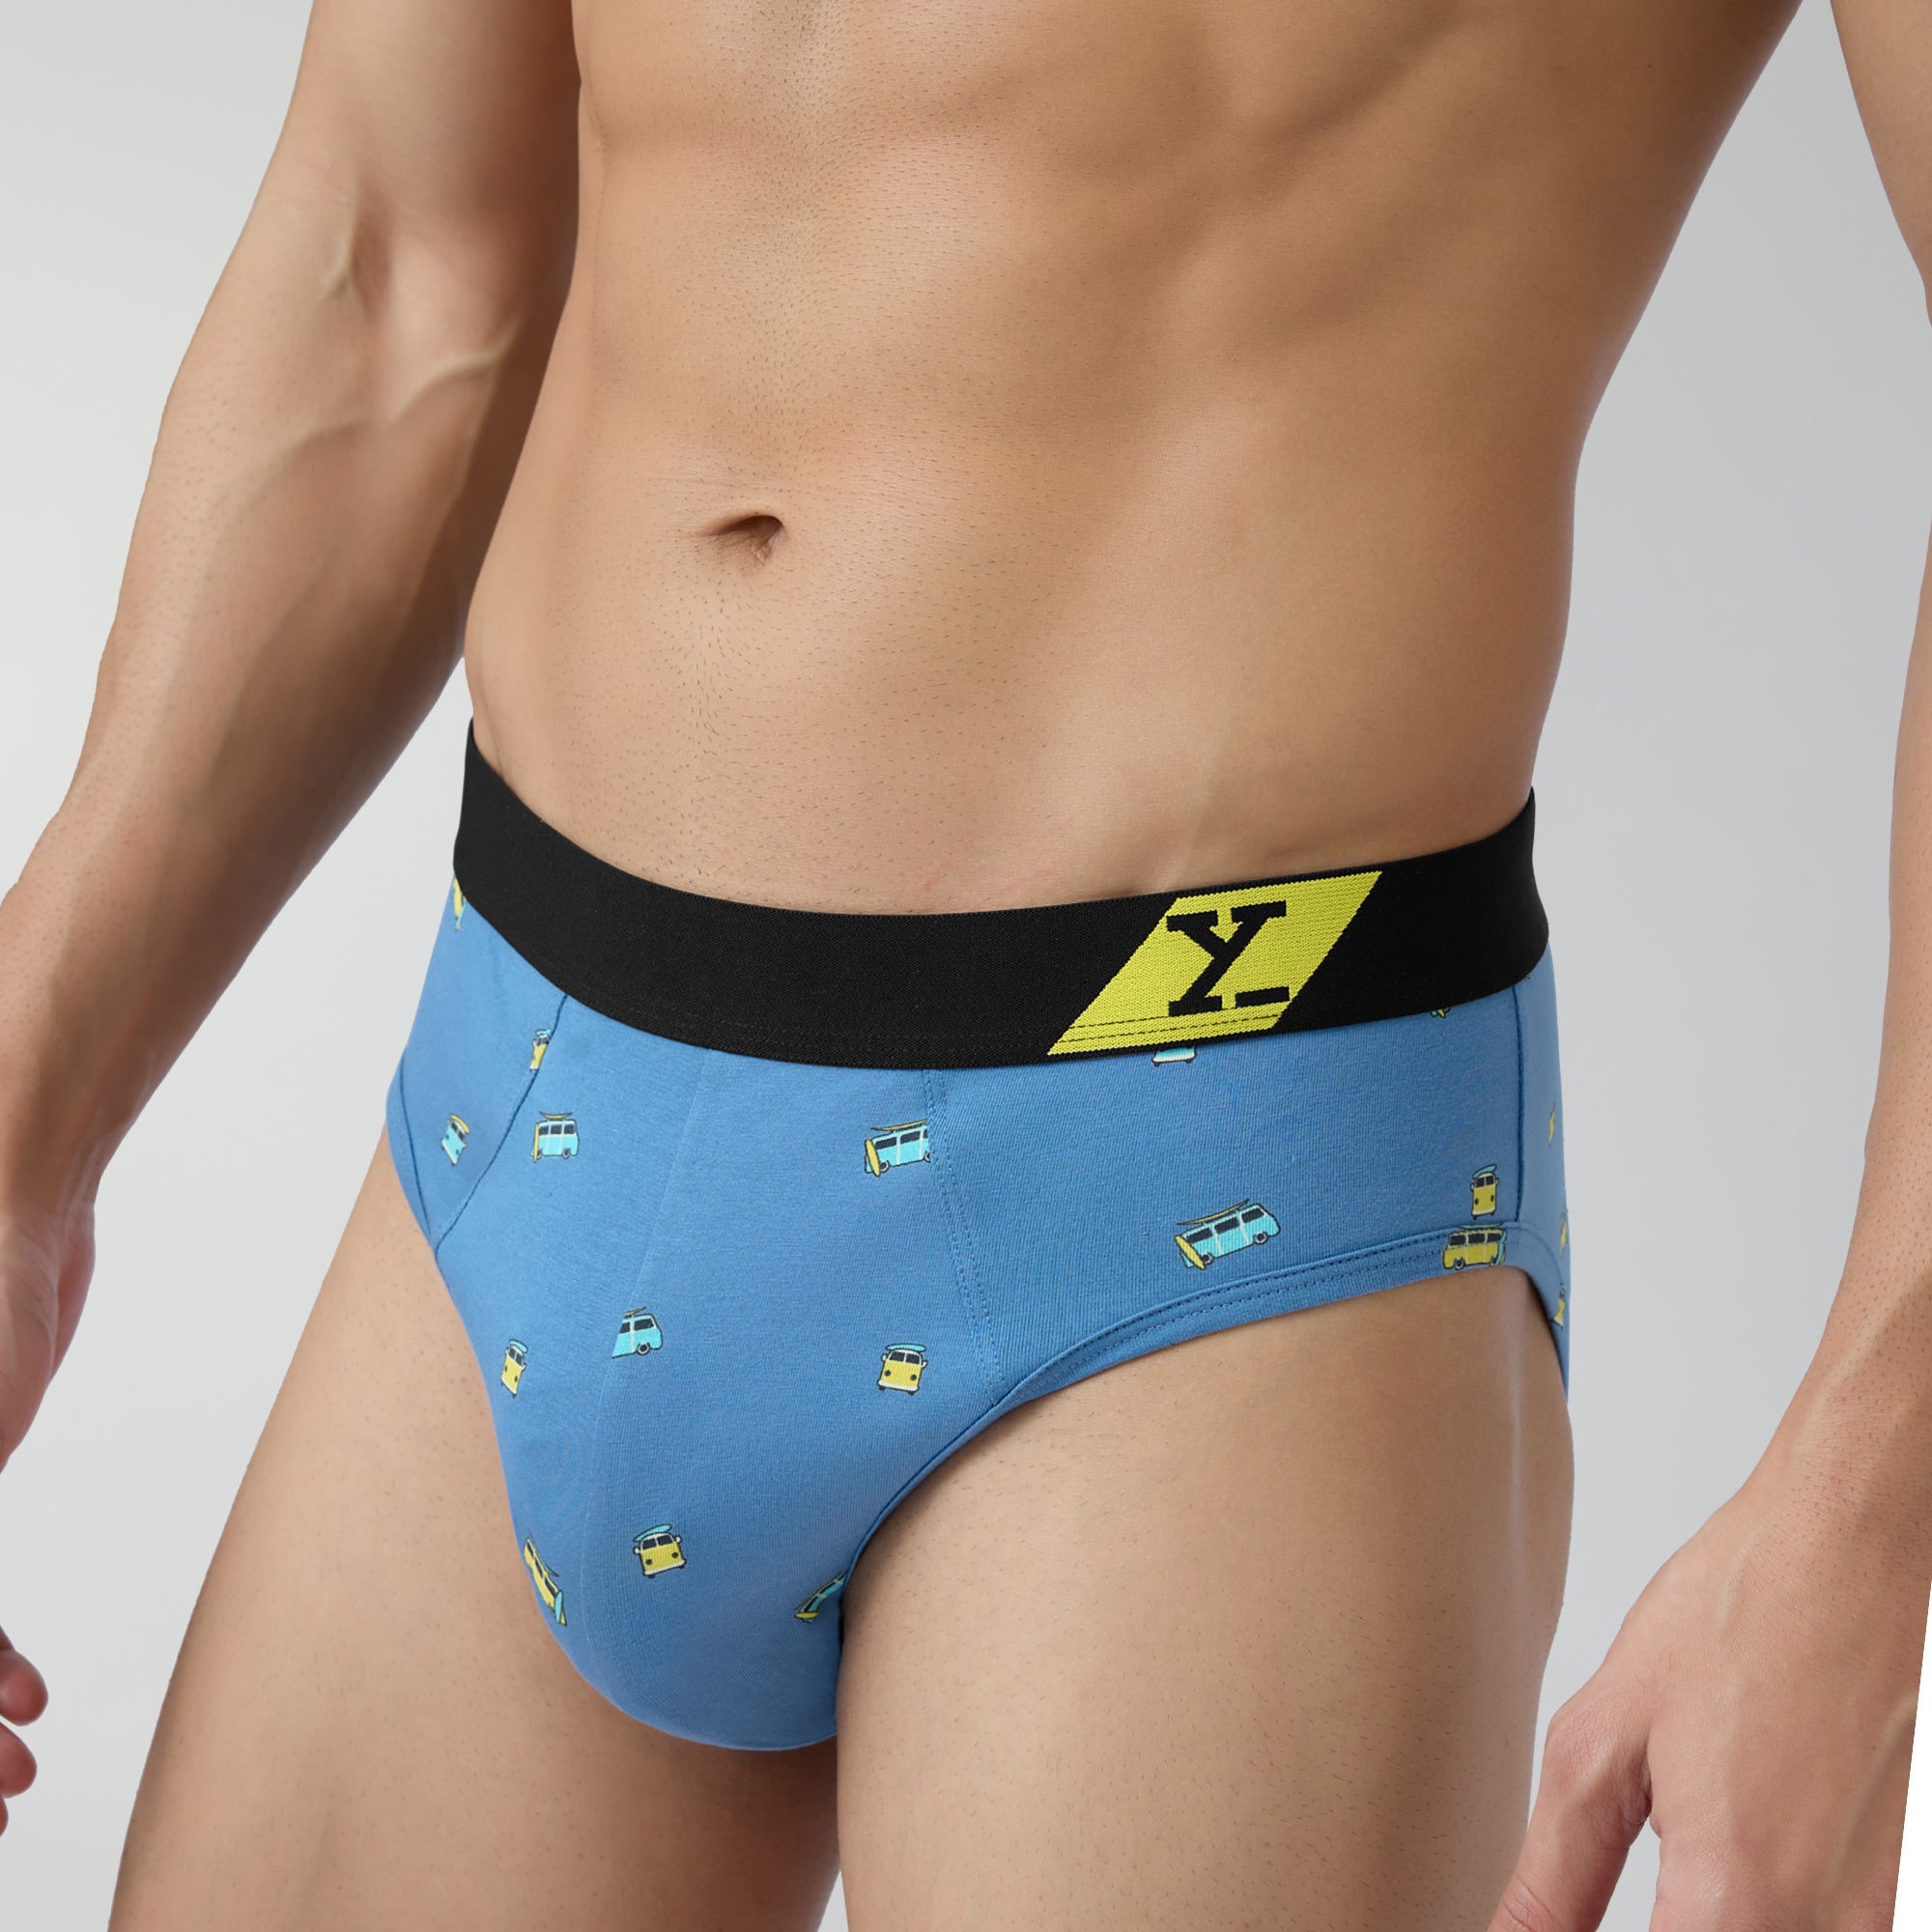 Underpants Mens Button Open Crotch Briefs Bulge Pouch Underwear Low Rise  Panties Cotton Solid Ultra Thin Knickers Erotic Lingeri From Baoqinni,  $10.84